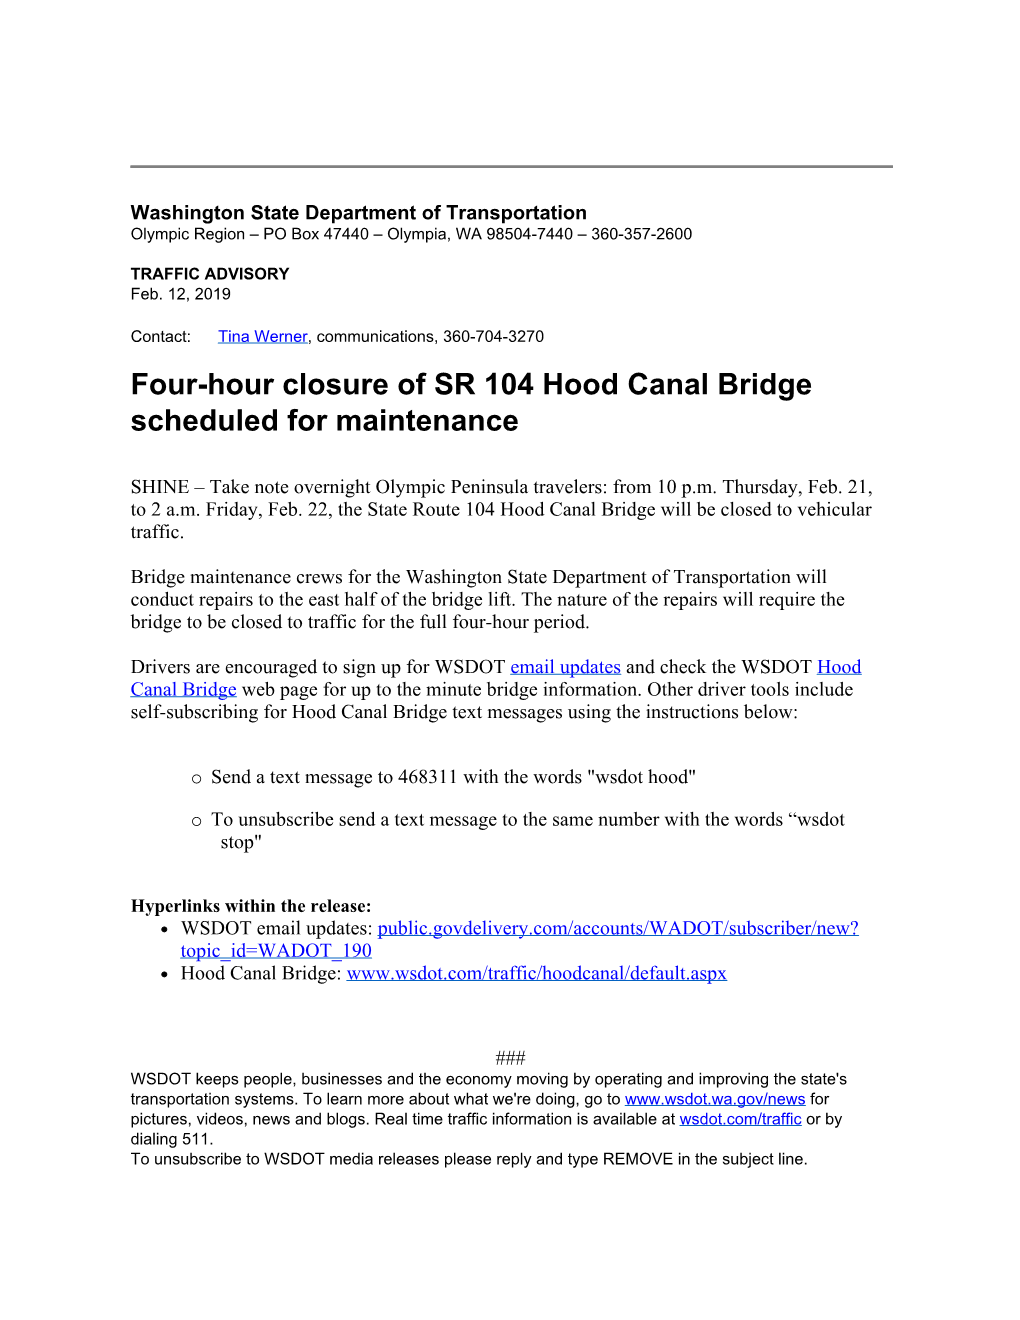 Four-Hour Closure of SR 104 Hood Canal Bridge Scheduled for Maintenance